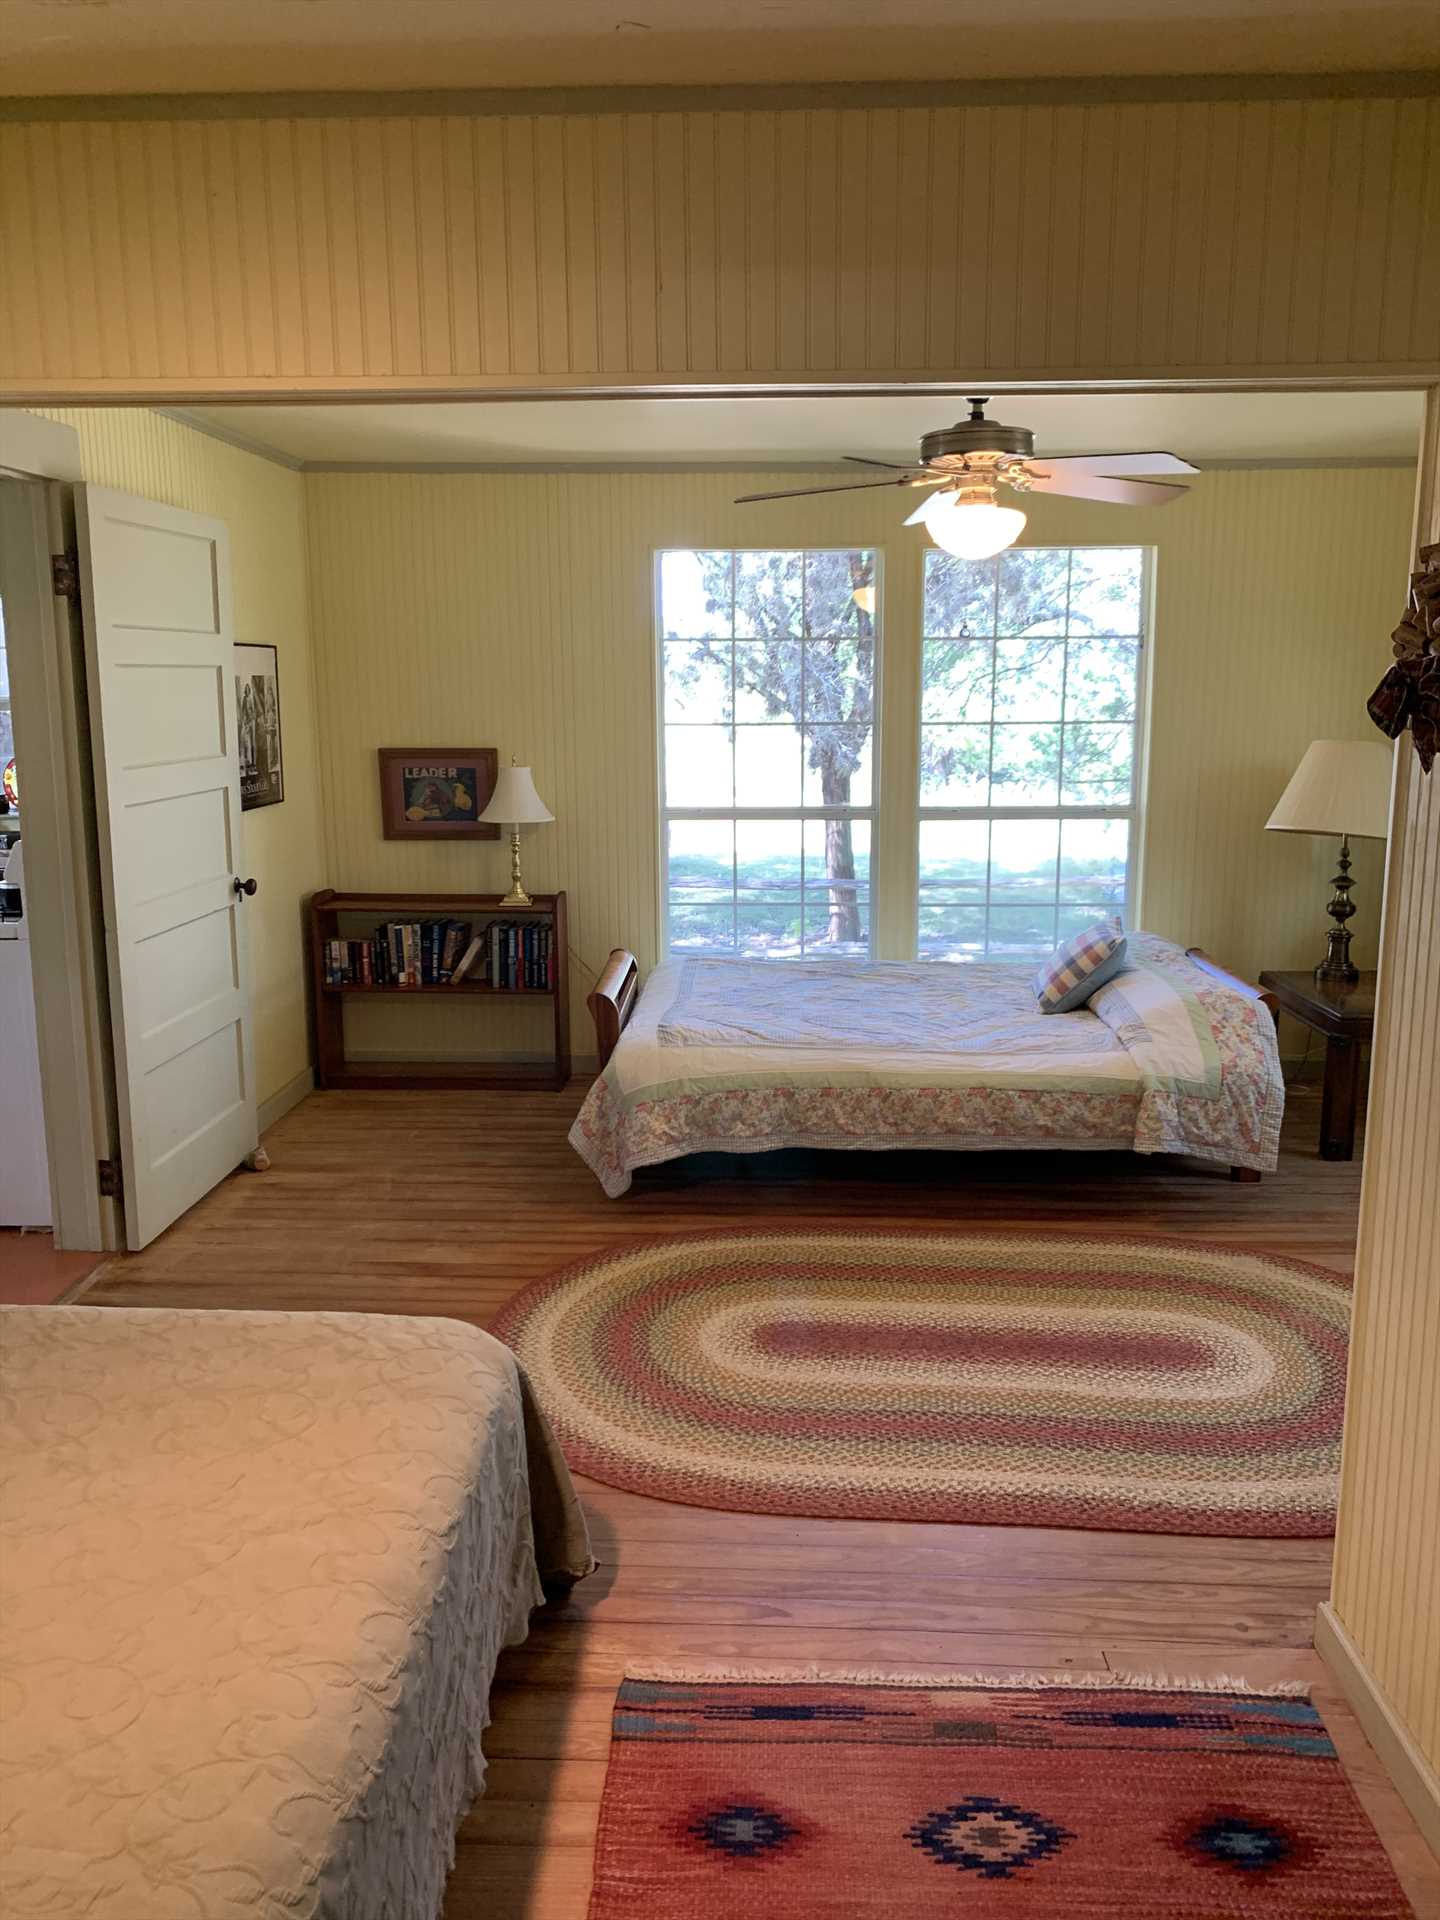                                                 Restful slumber will greet you in the main bedroom, furnished with both a queen and full bed.